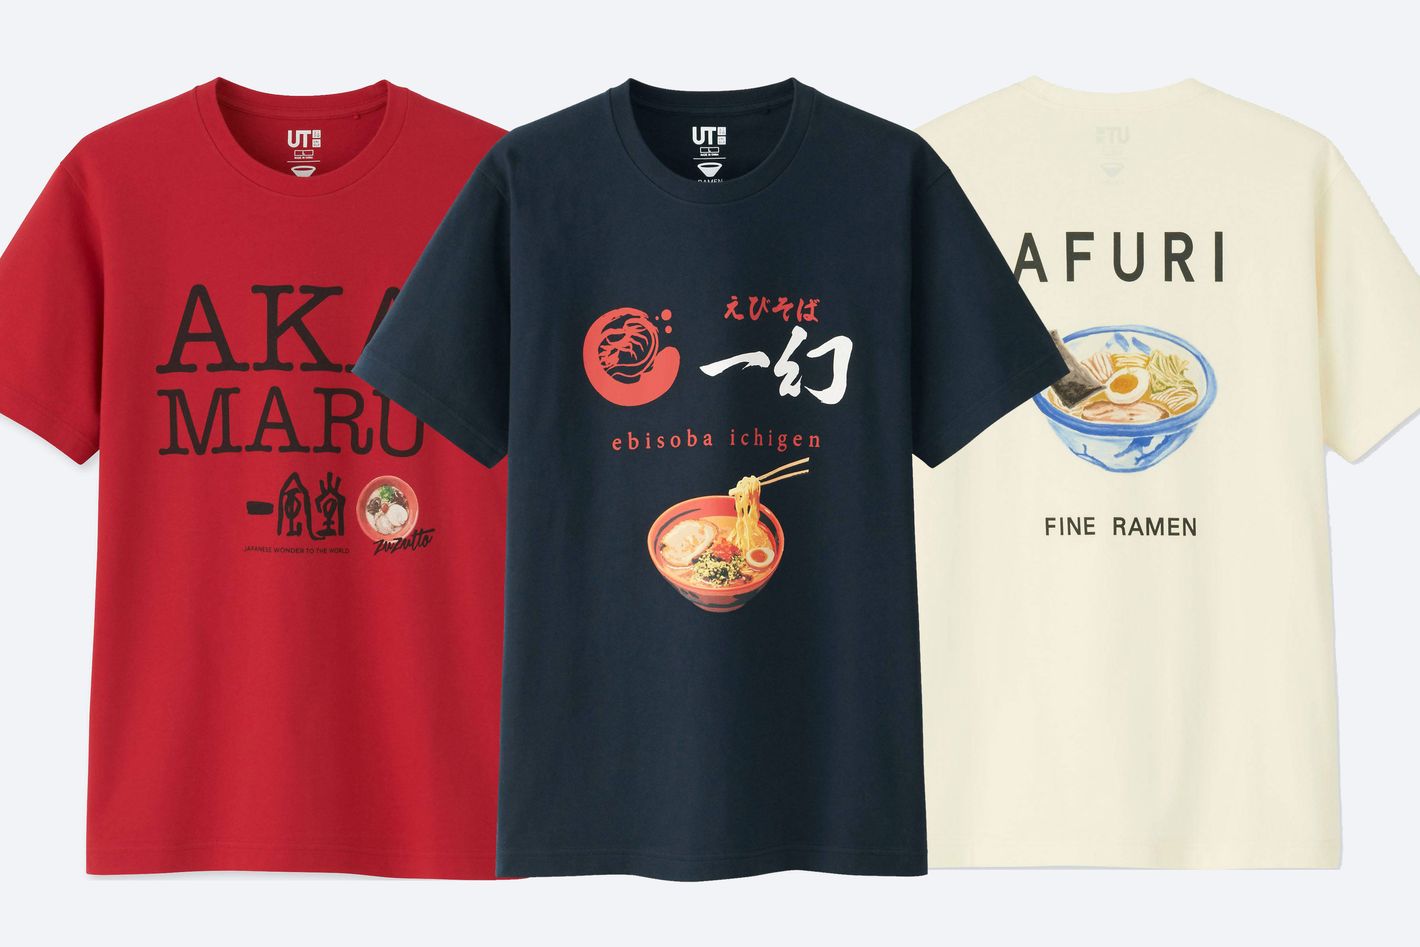 UNIQLO designs special Singapore neighbourhood tshirts because National  Day  MothershipSG  News from Singapore Asia and around the world